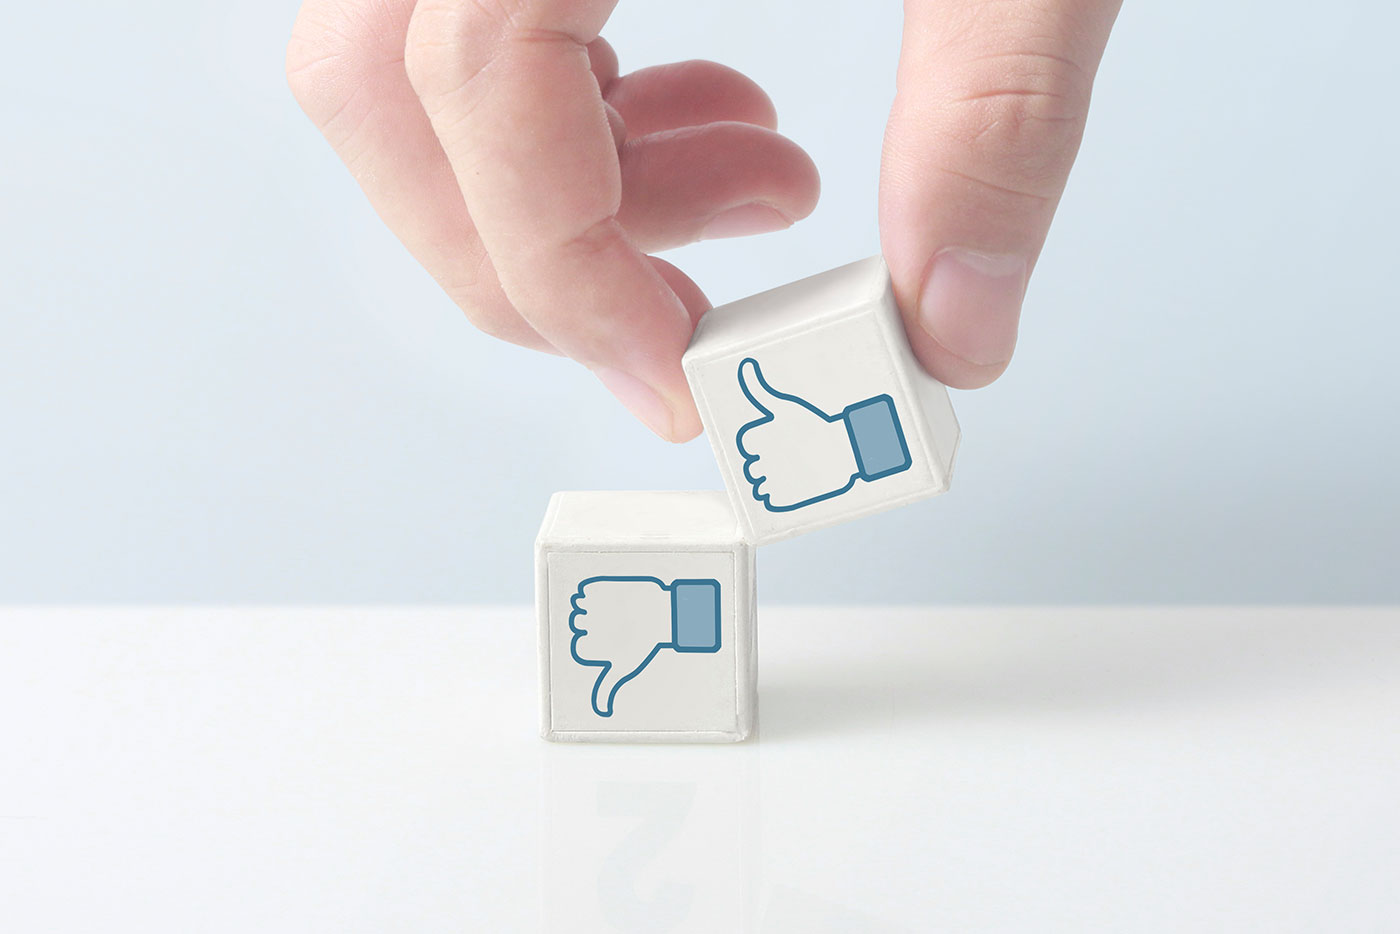 How to Get More Positive Reviews on Facebook